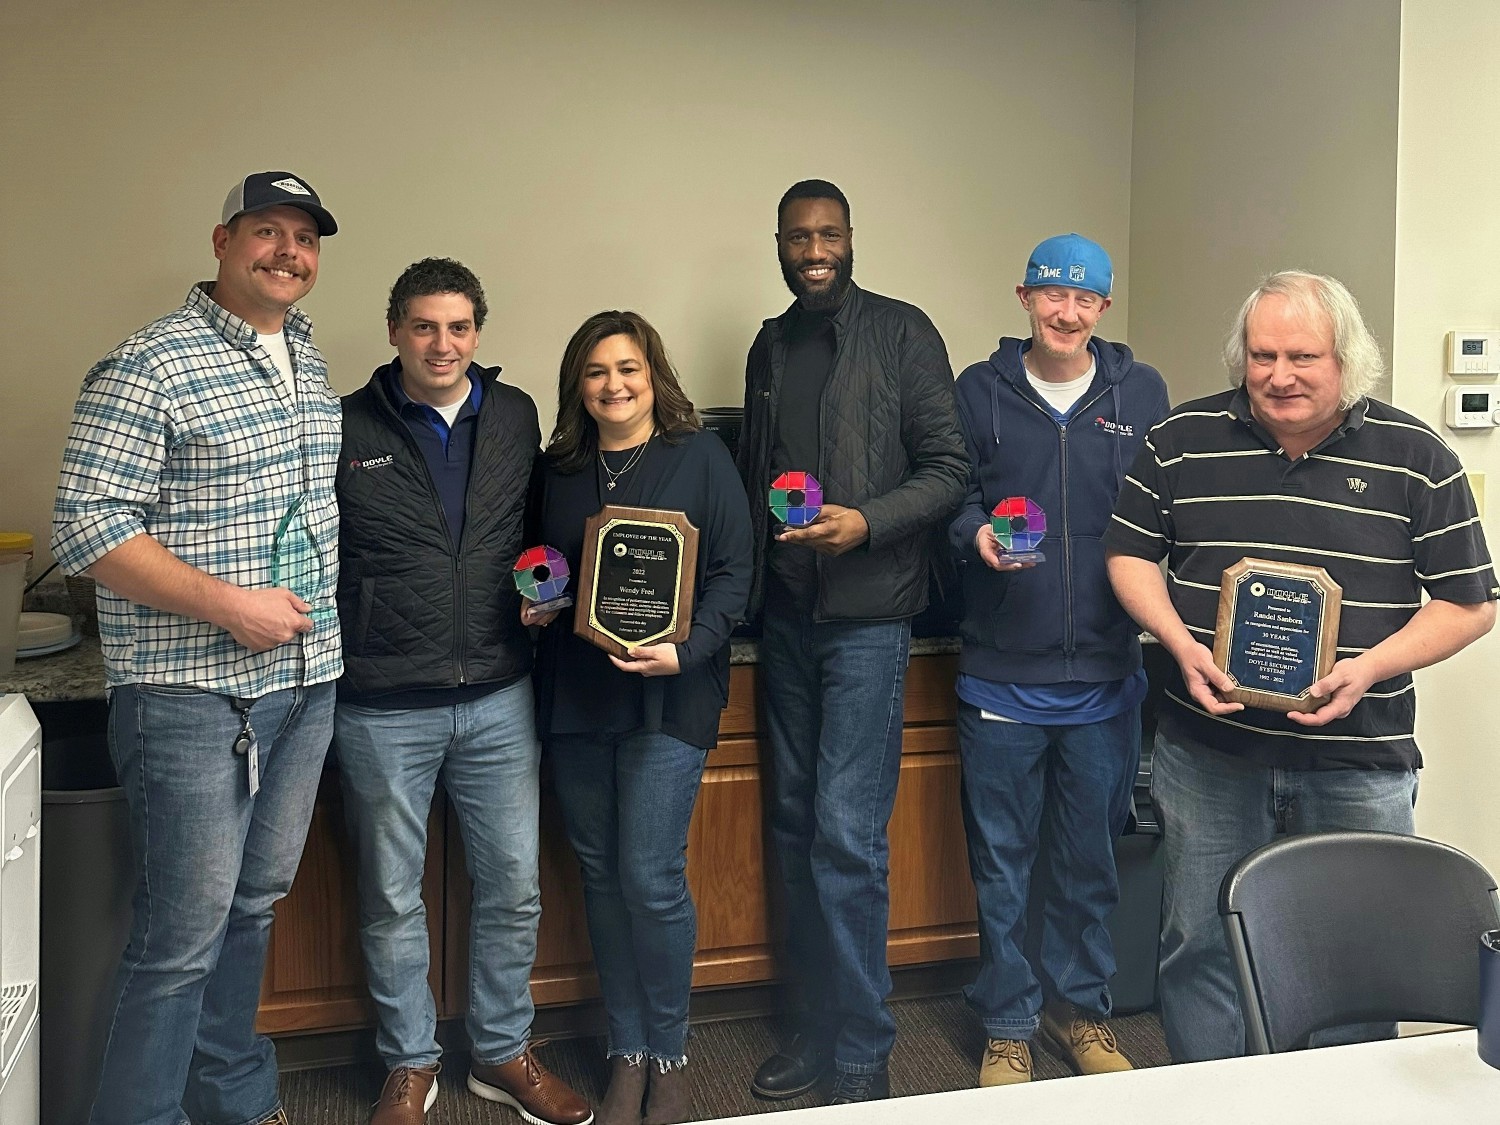 Fishkill team award winners showing off their awards after our Annual Meeting